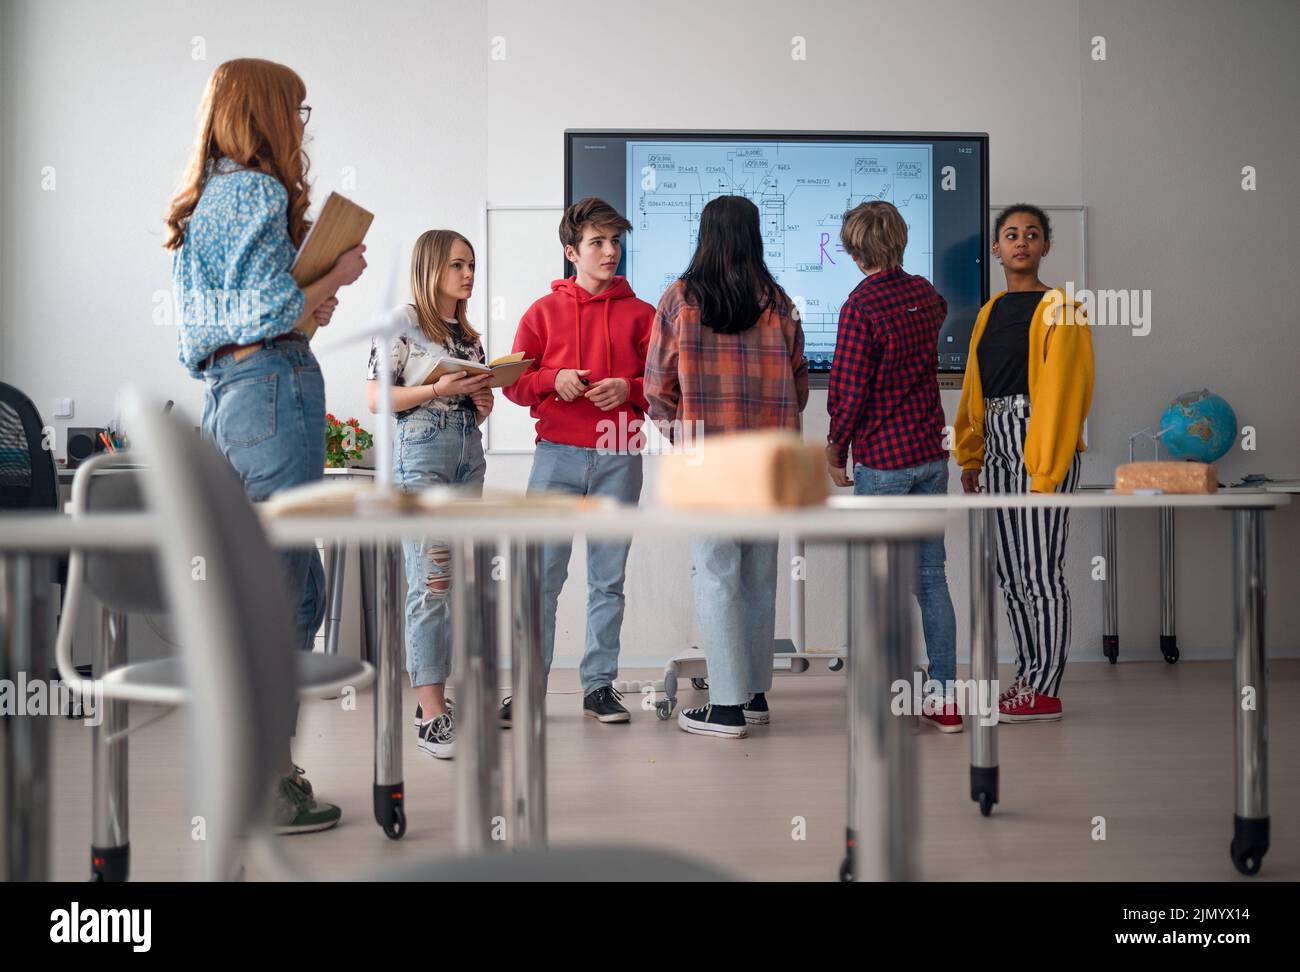 College student explaining some ideas on a touch TV in classroom. Stock Photo